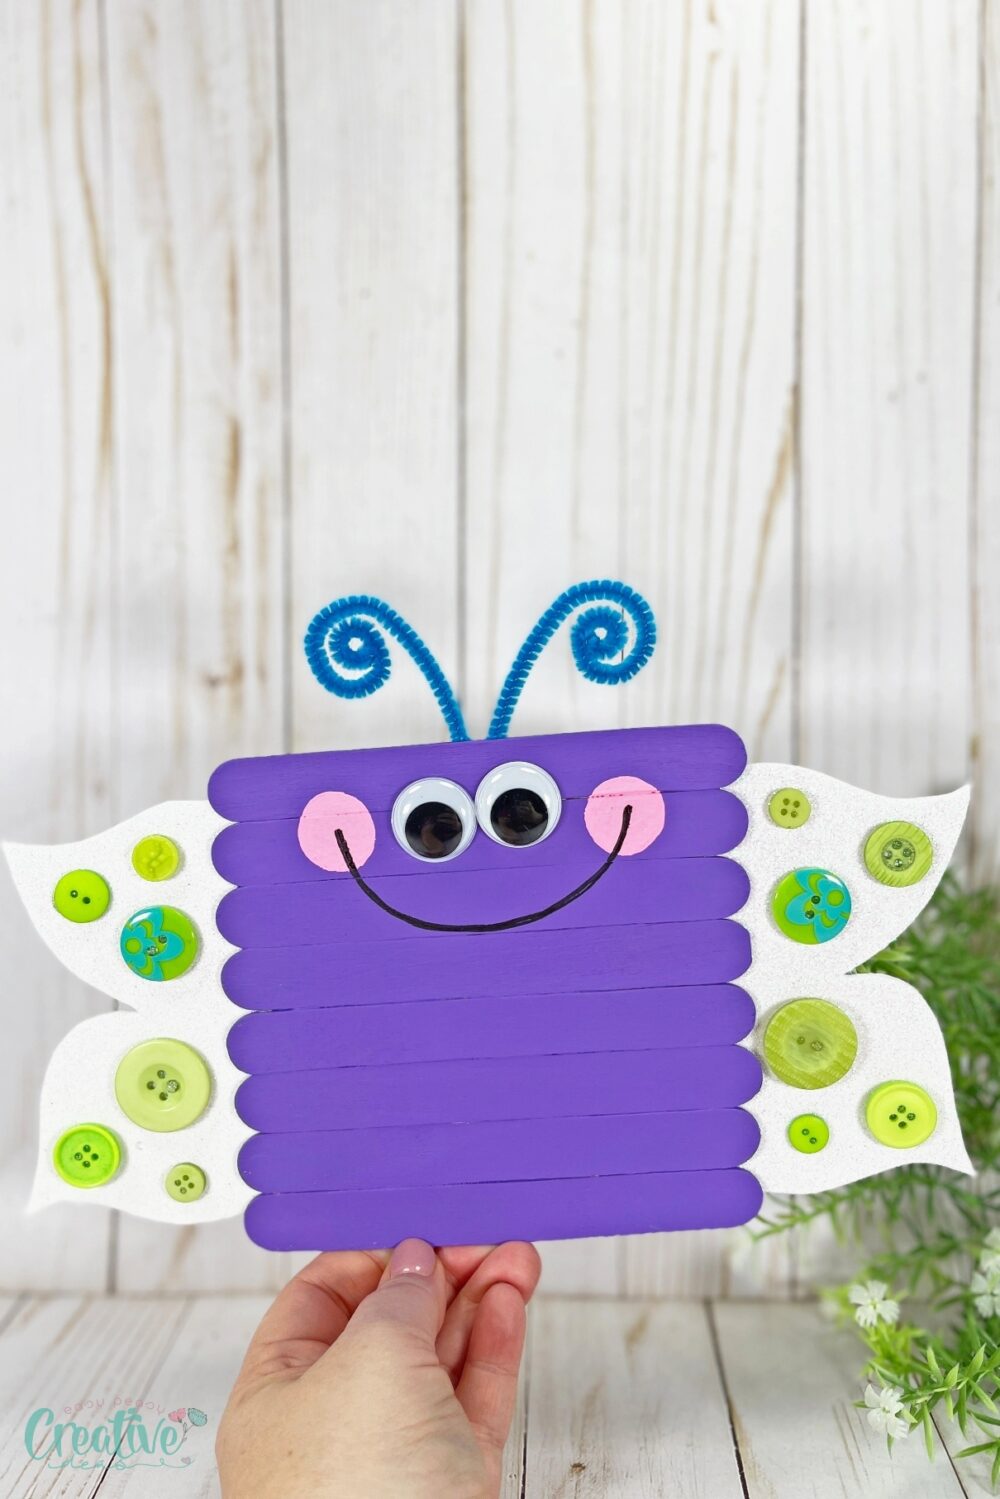 Get ready to let your creativity soar with this amazing DIY butterfly! Add a burst of color and fun to your living space with this easy and cute DIY activity.